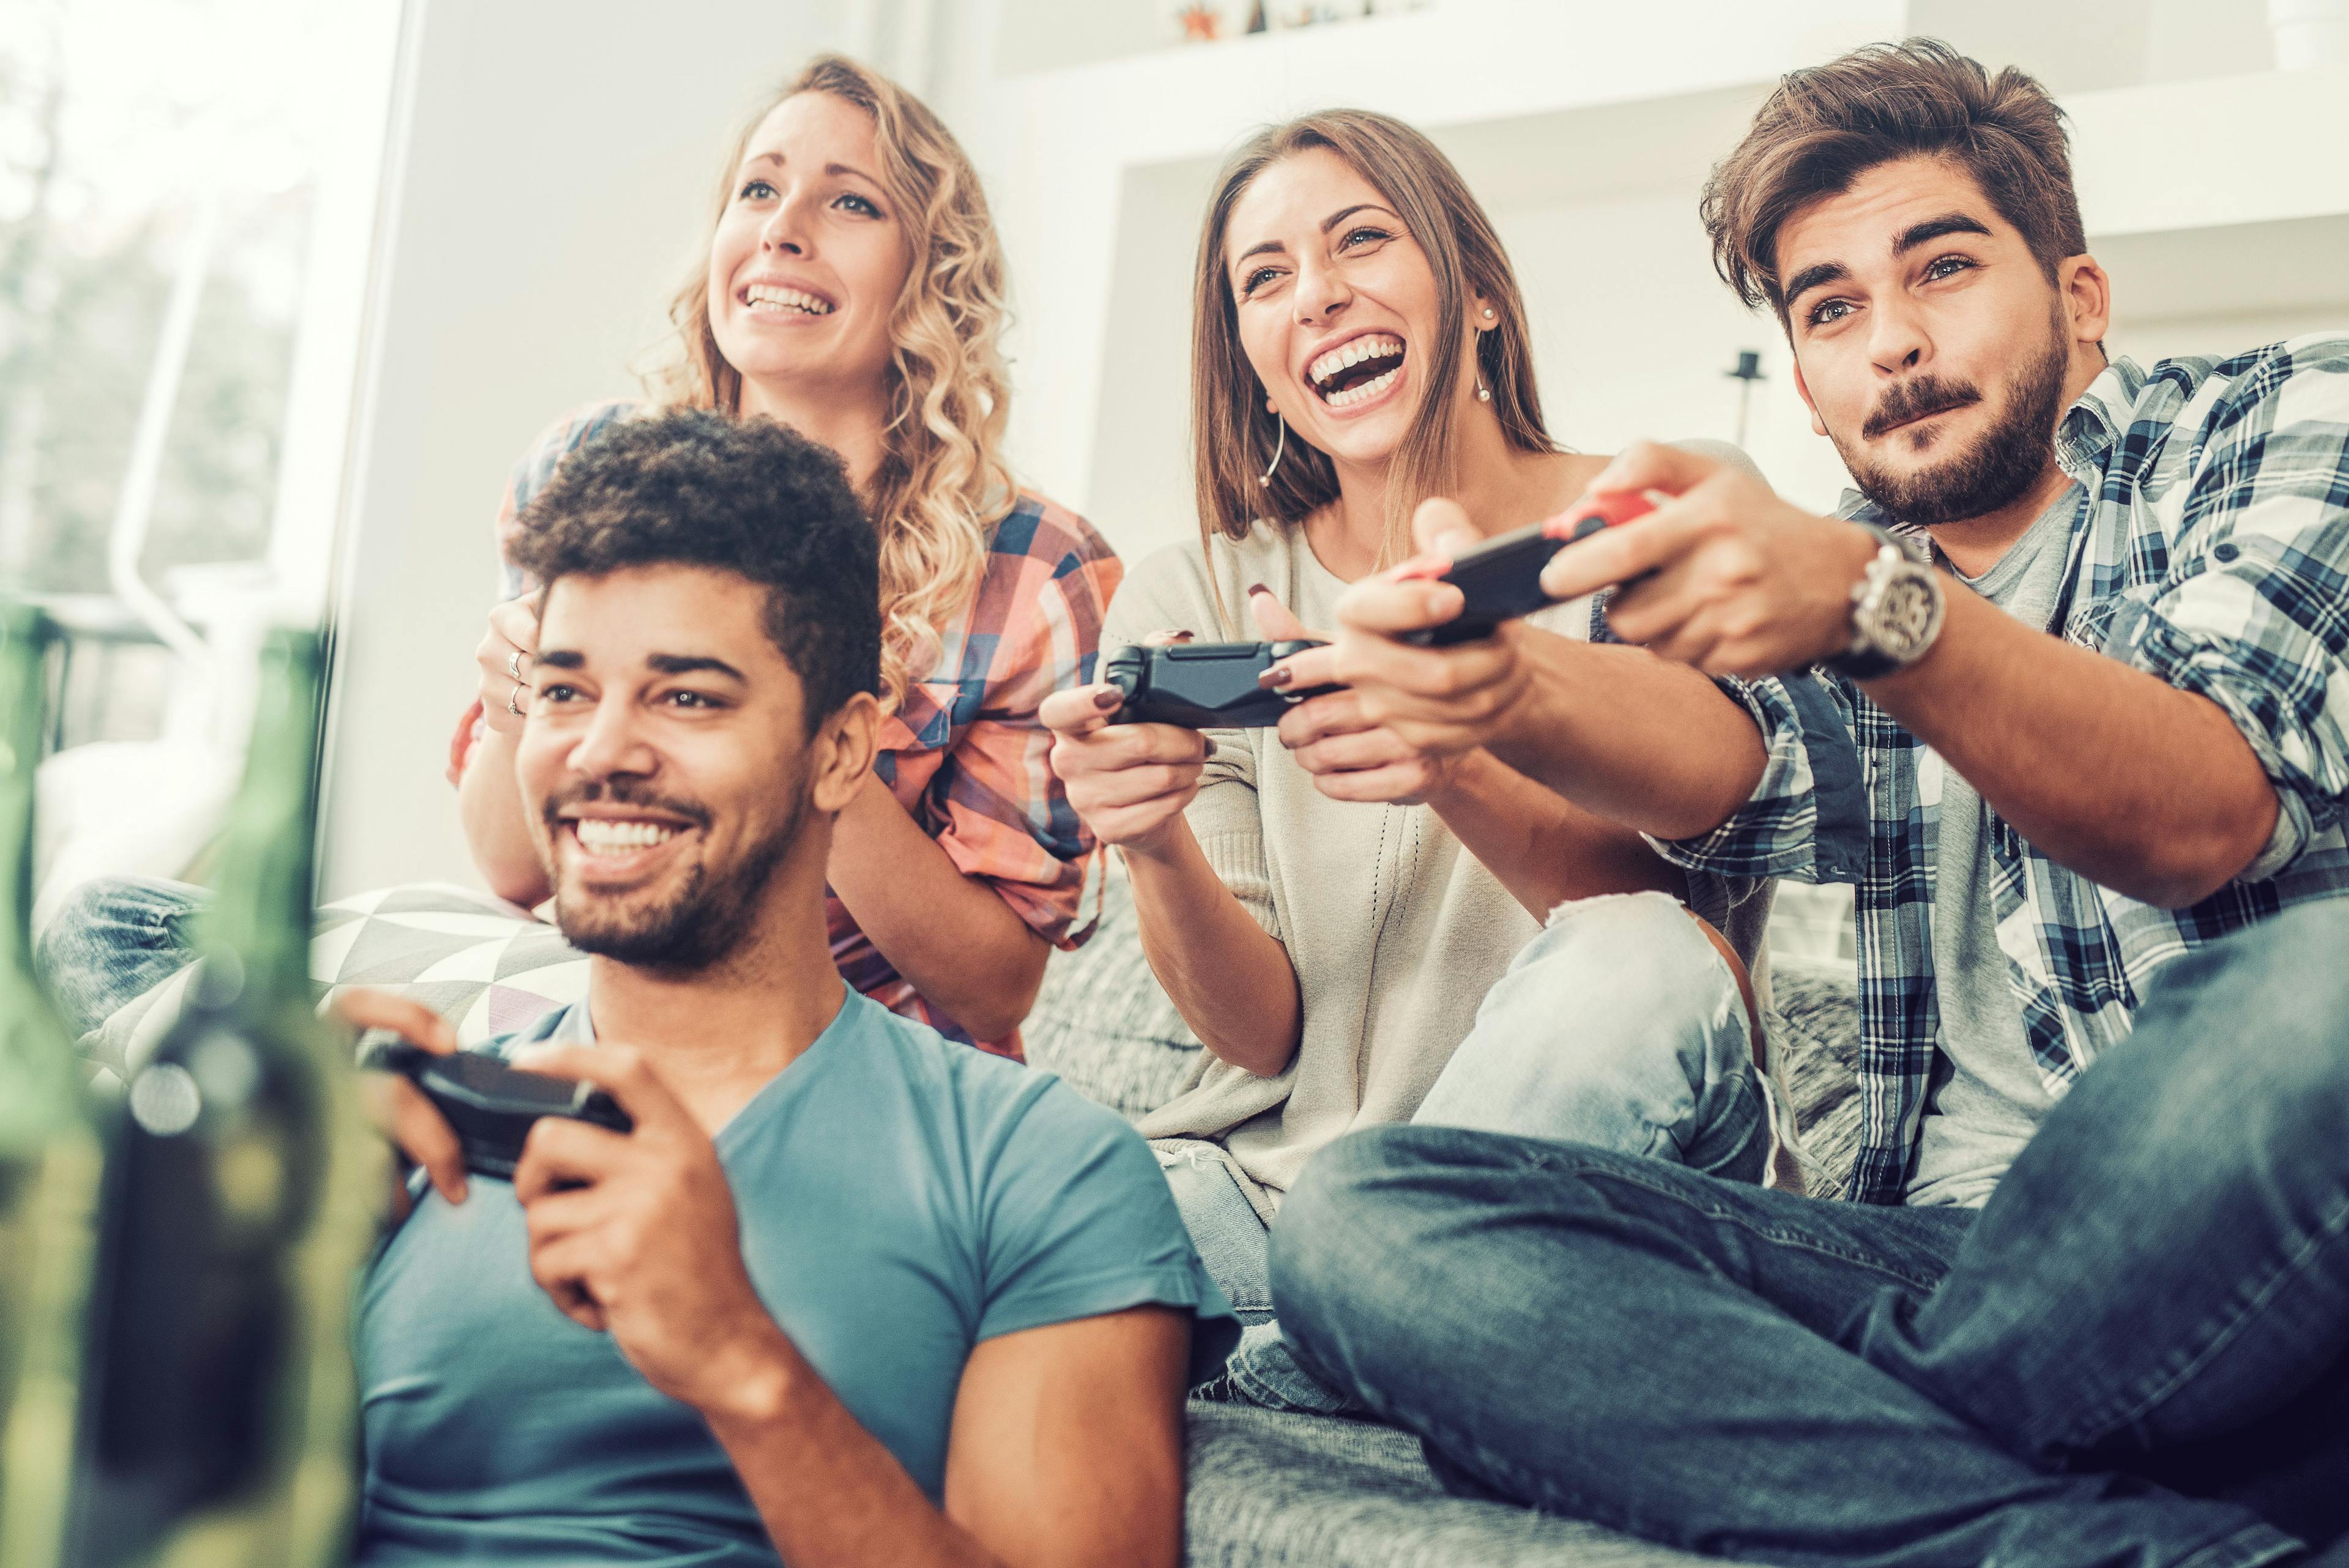 Video games and skin ailments 